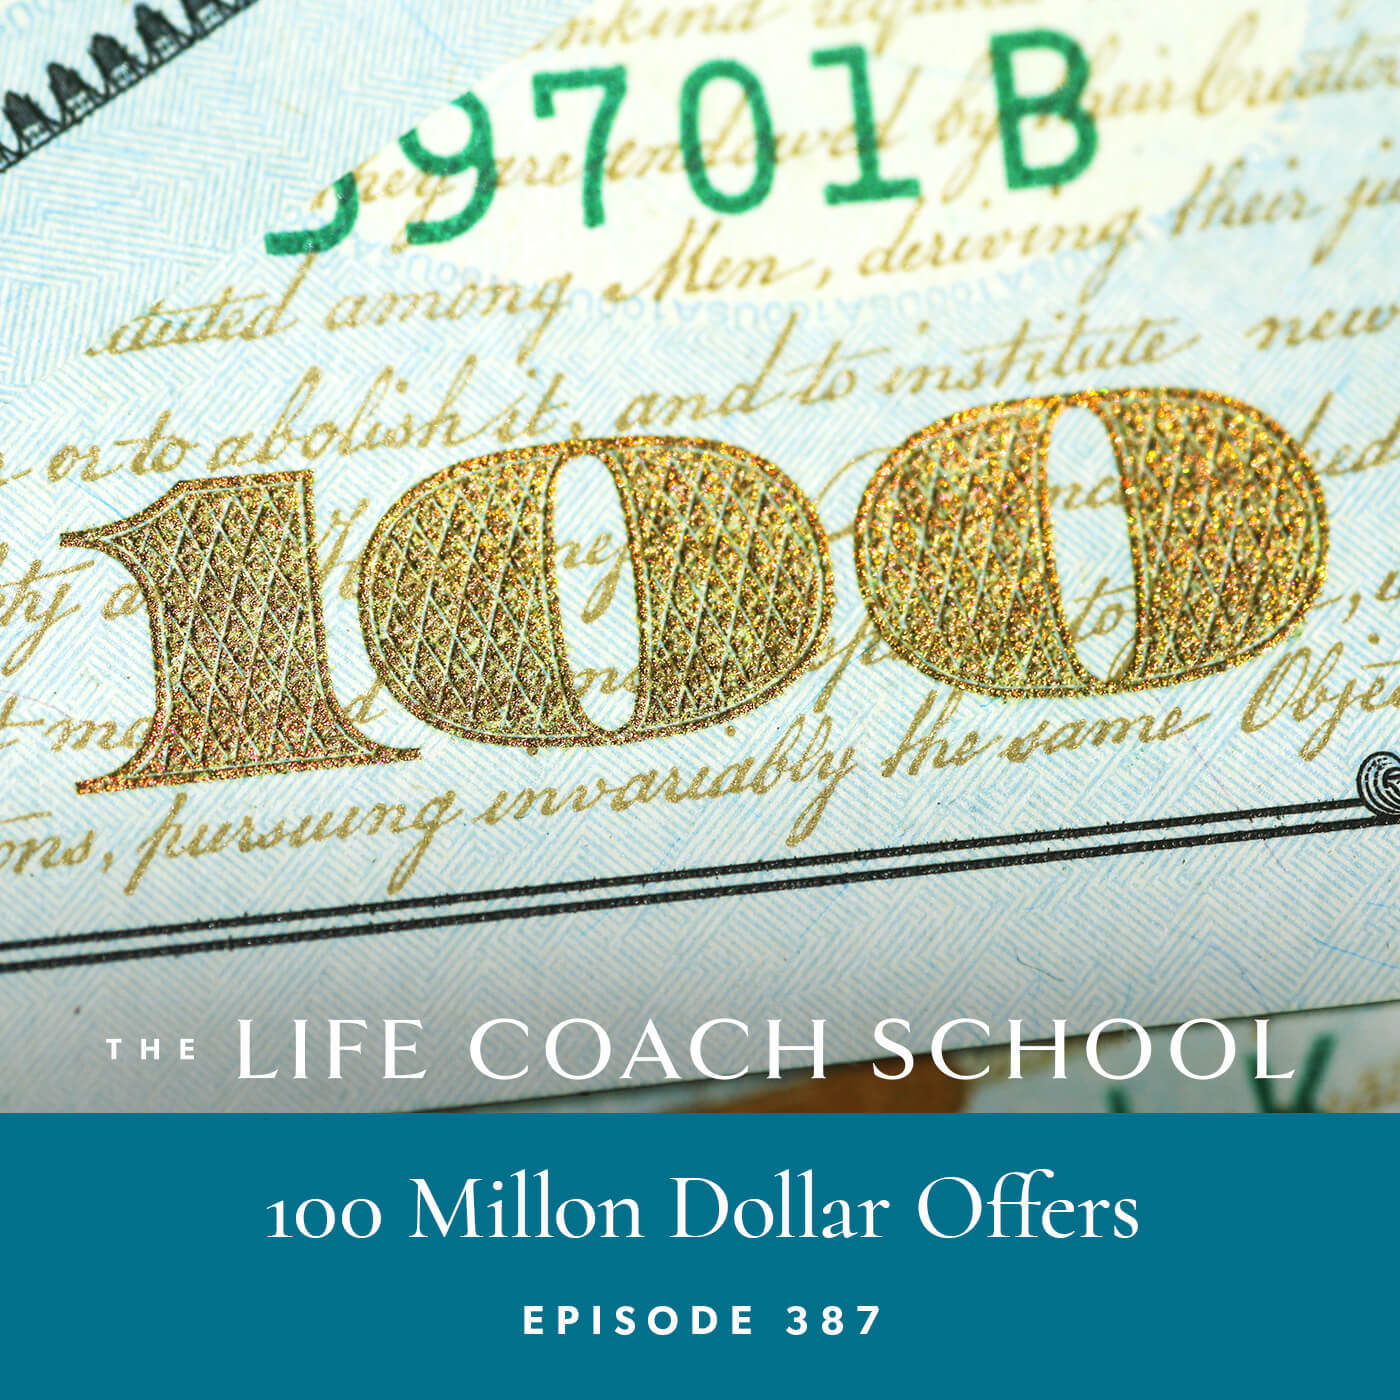 The Life Coach School Podcast with Brooke Castillo | 100 Million Dollar Offers